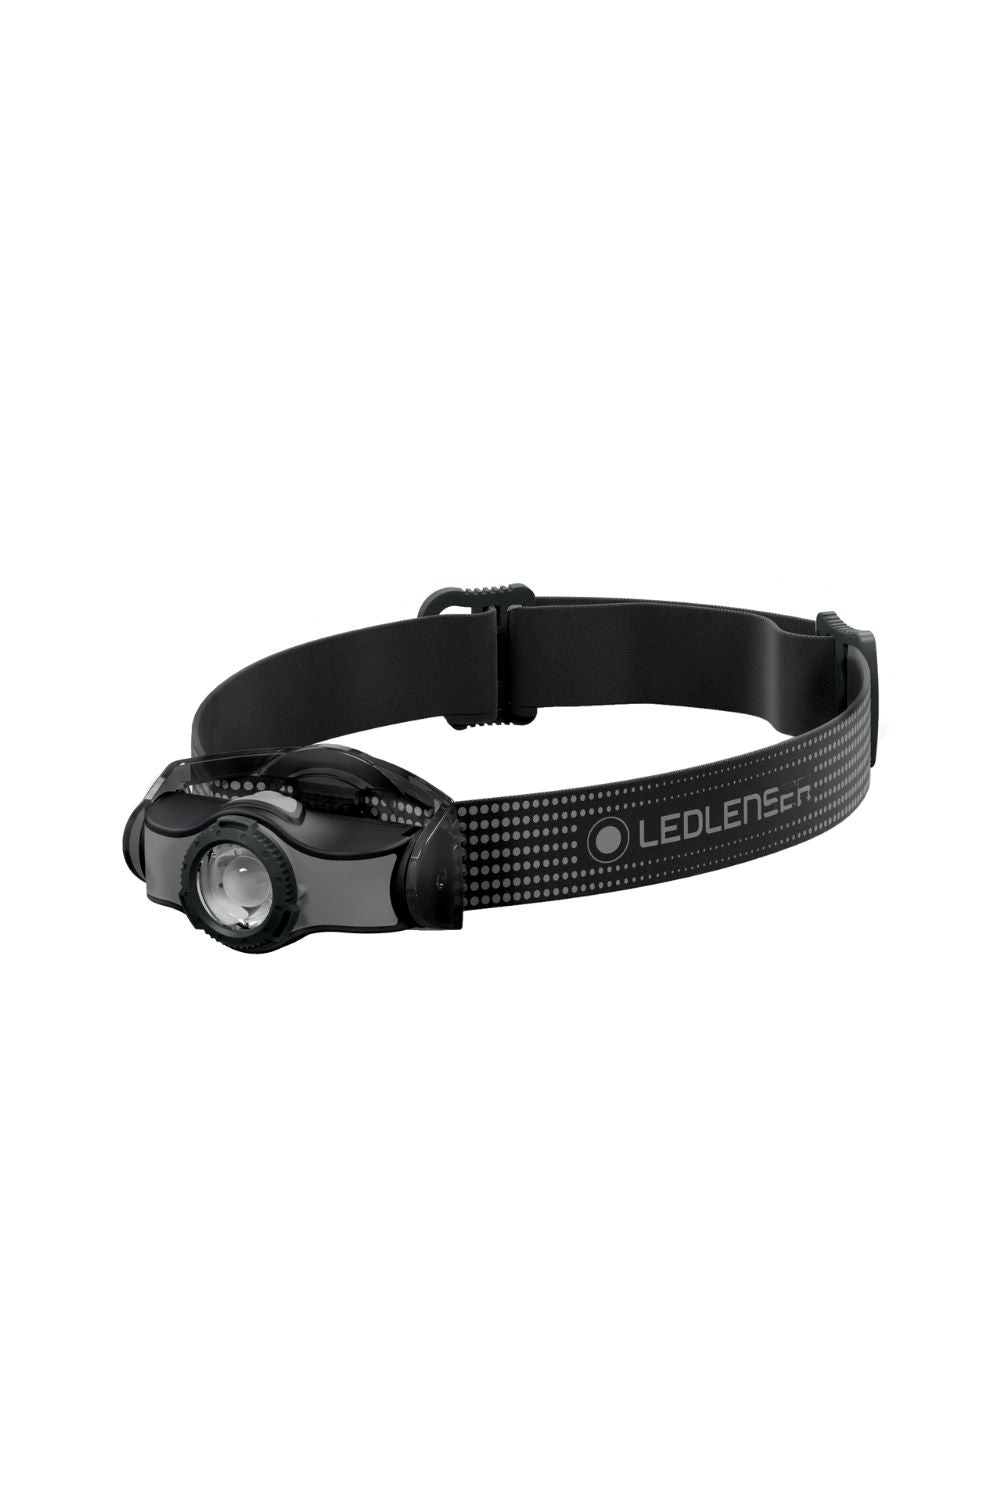 Mh3 Rechargeable Outdoor Led Head Torch -